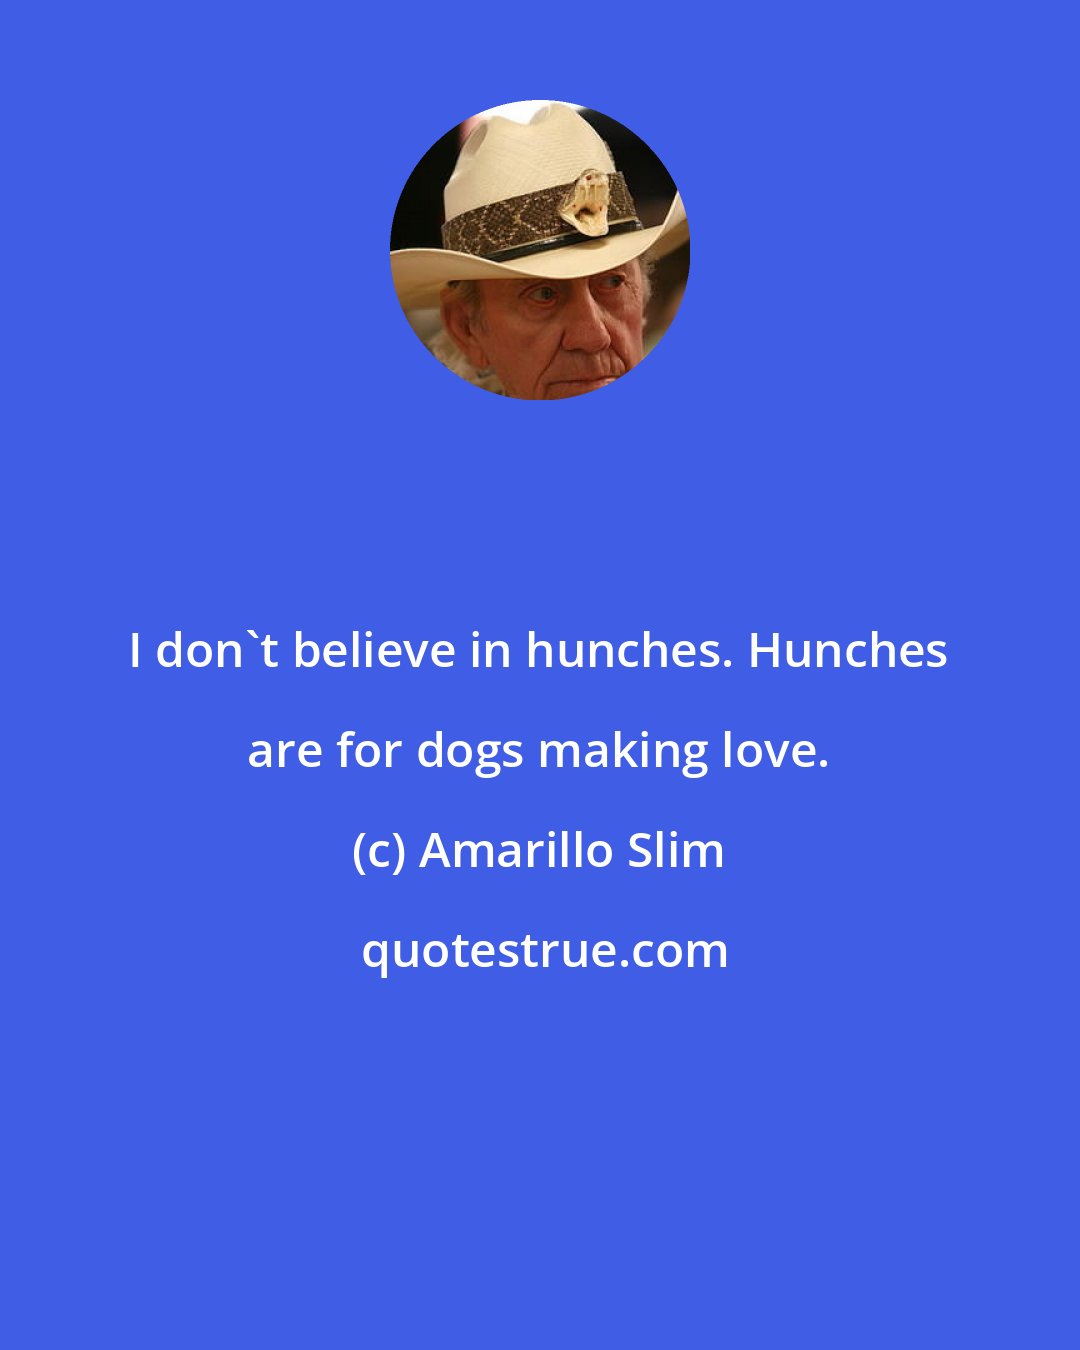 Amarillo Slim: I don't believe in hunches. Hunches are for dogs making love.